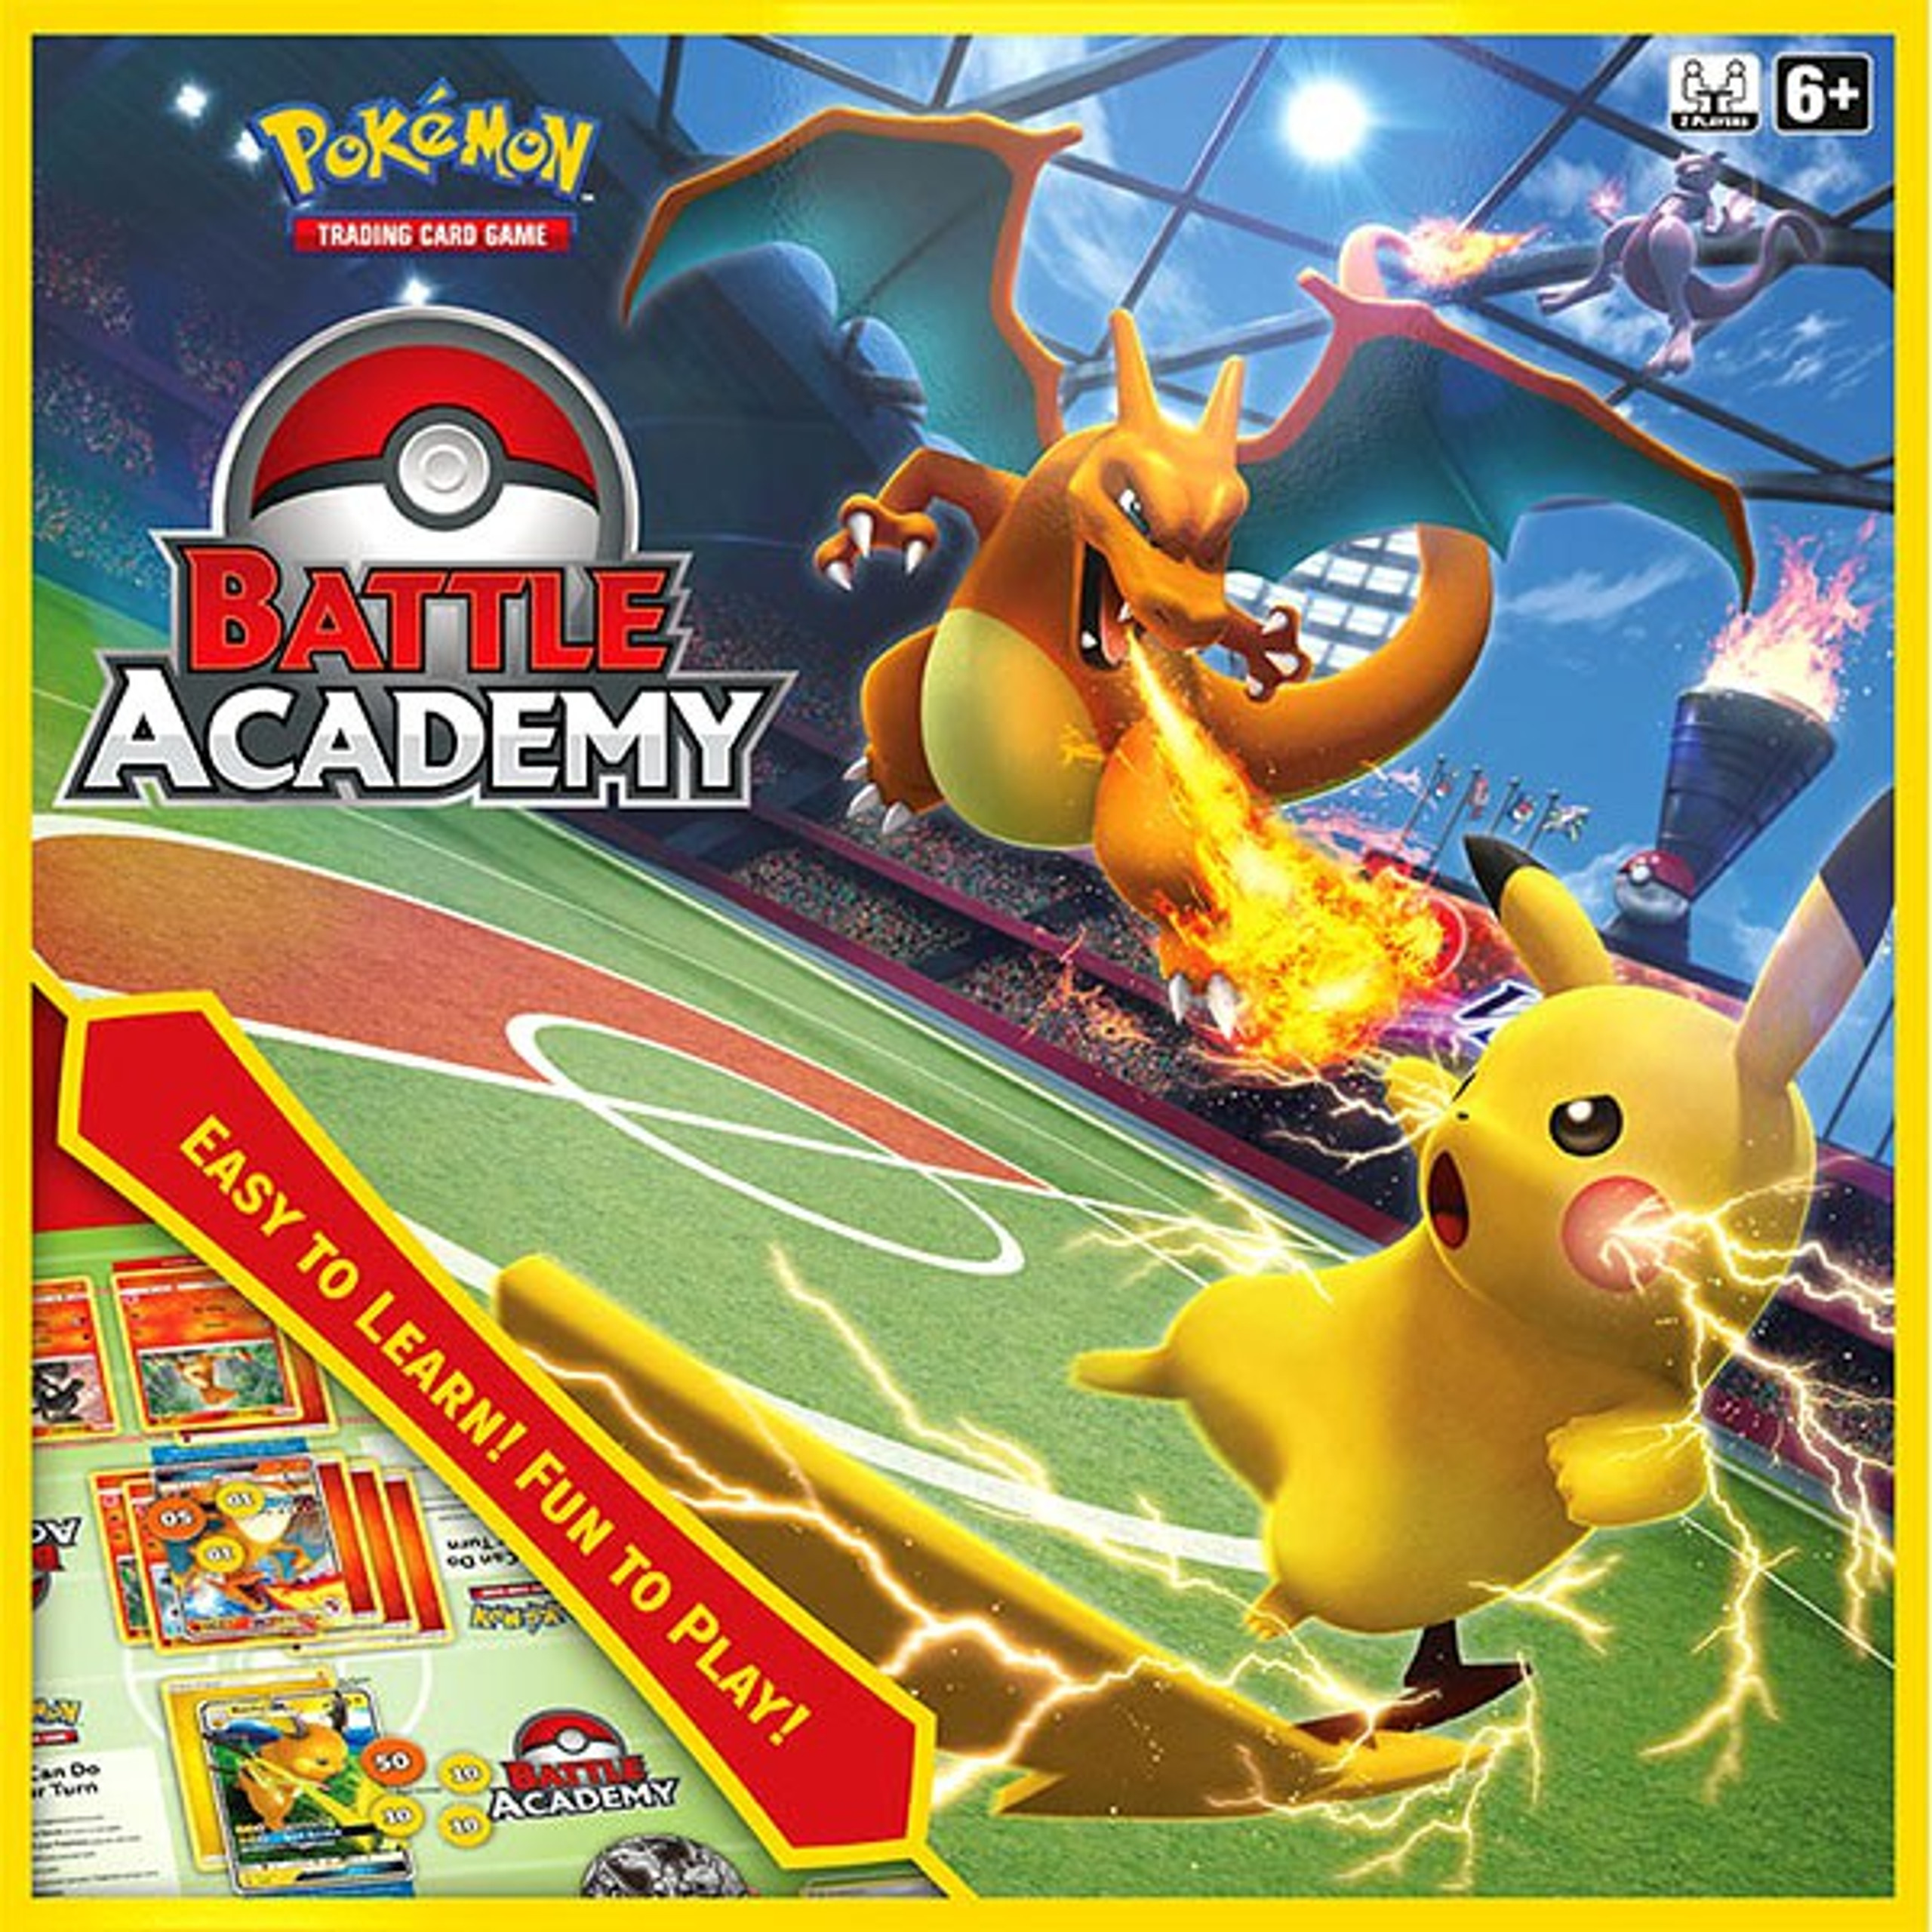 Pokemon Trading Card Game Battle Academy Box 3 Complete Decks Featuring